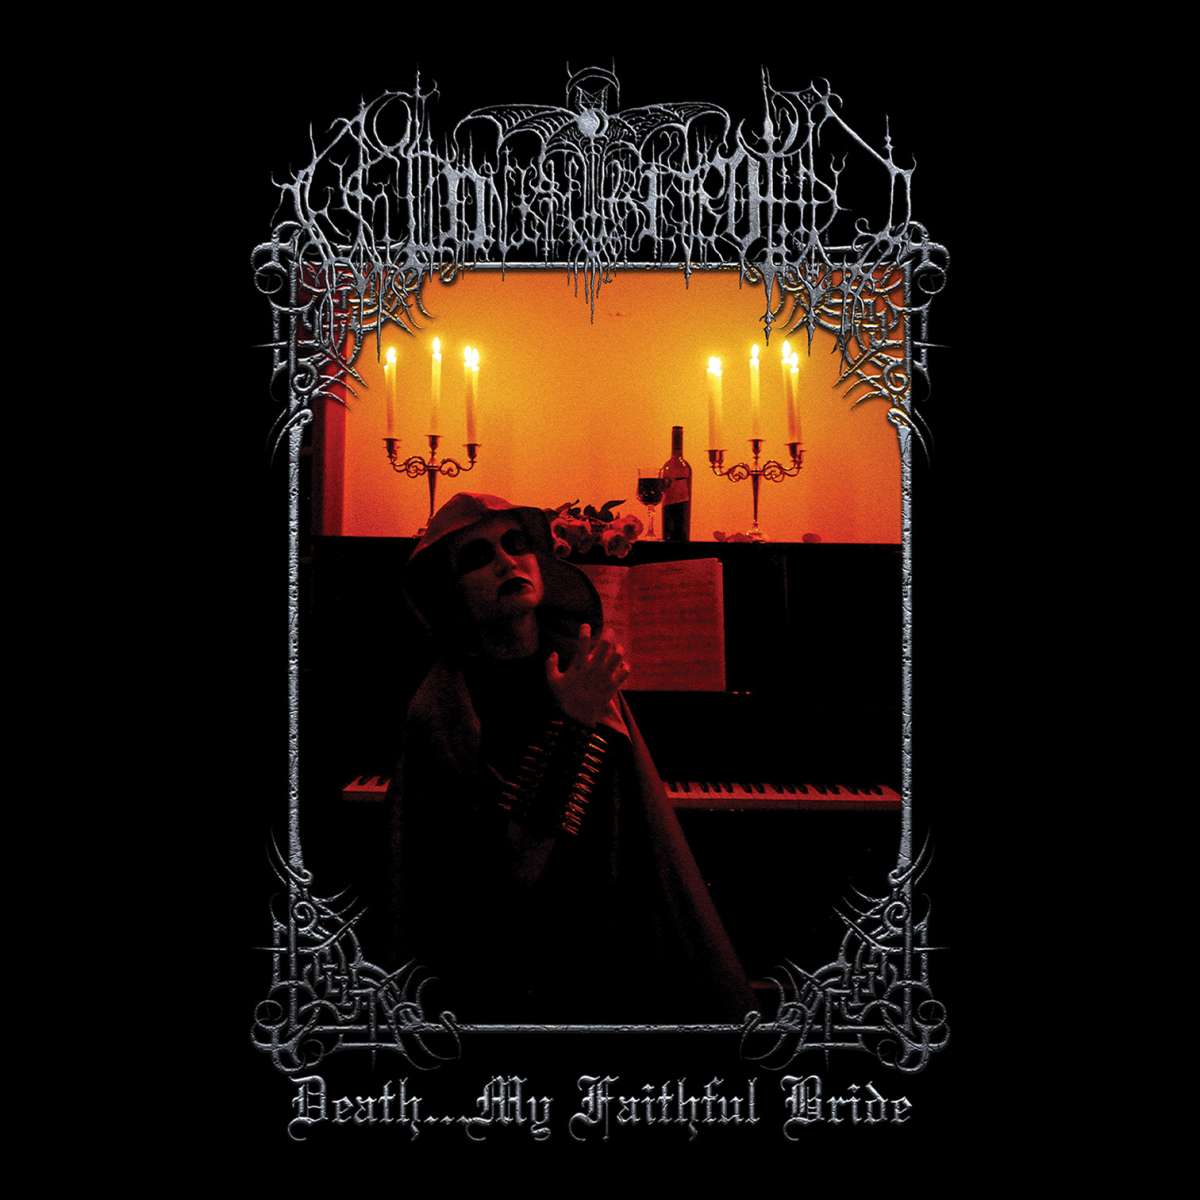 Midnight Betrothed - Death...My Faithful Bride [CD]